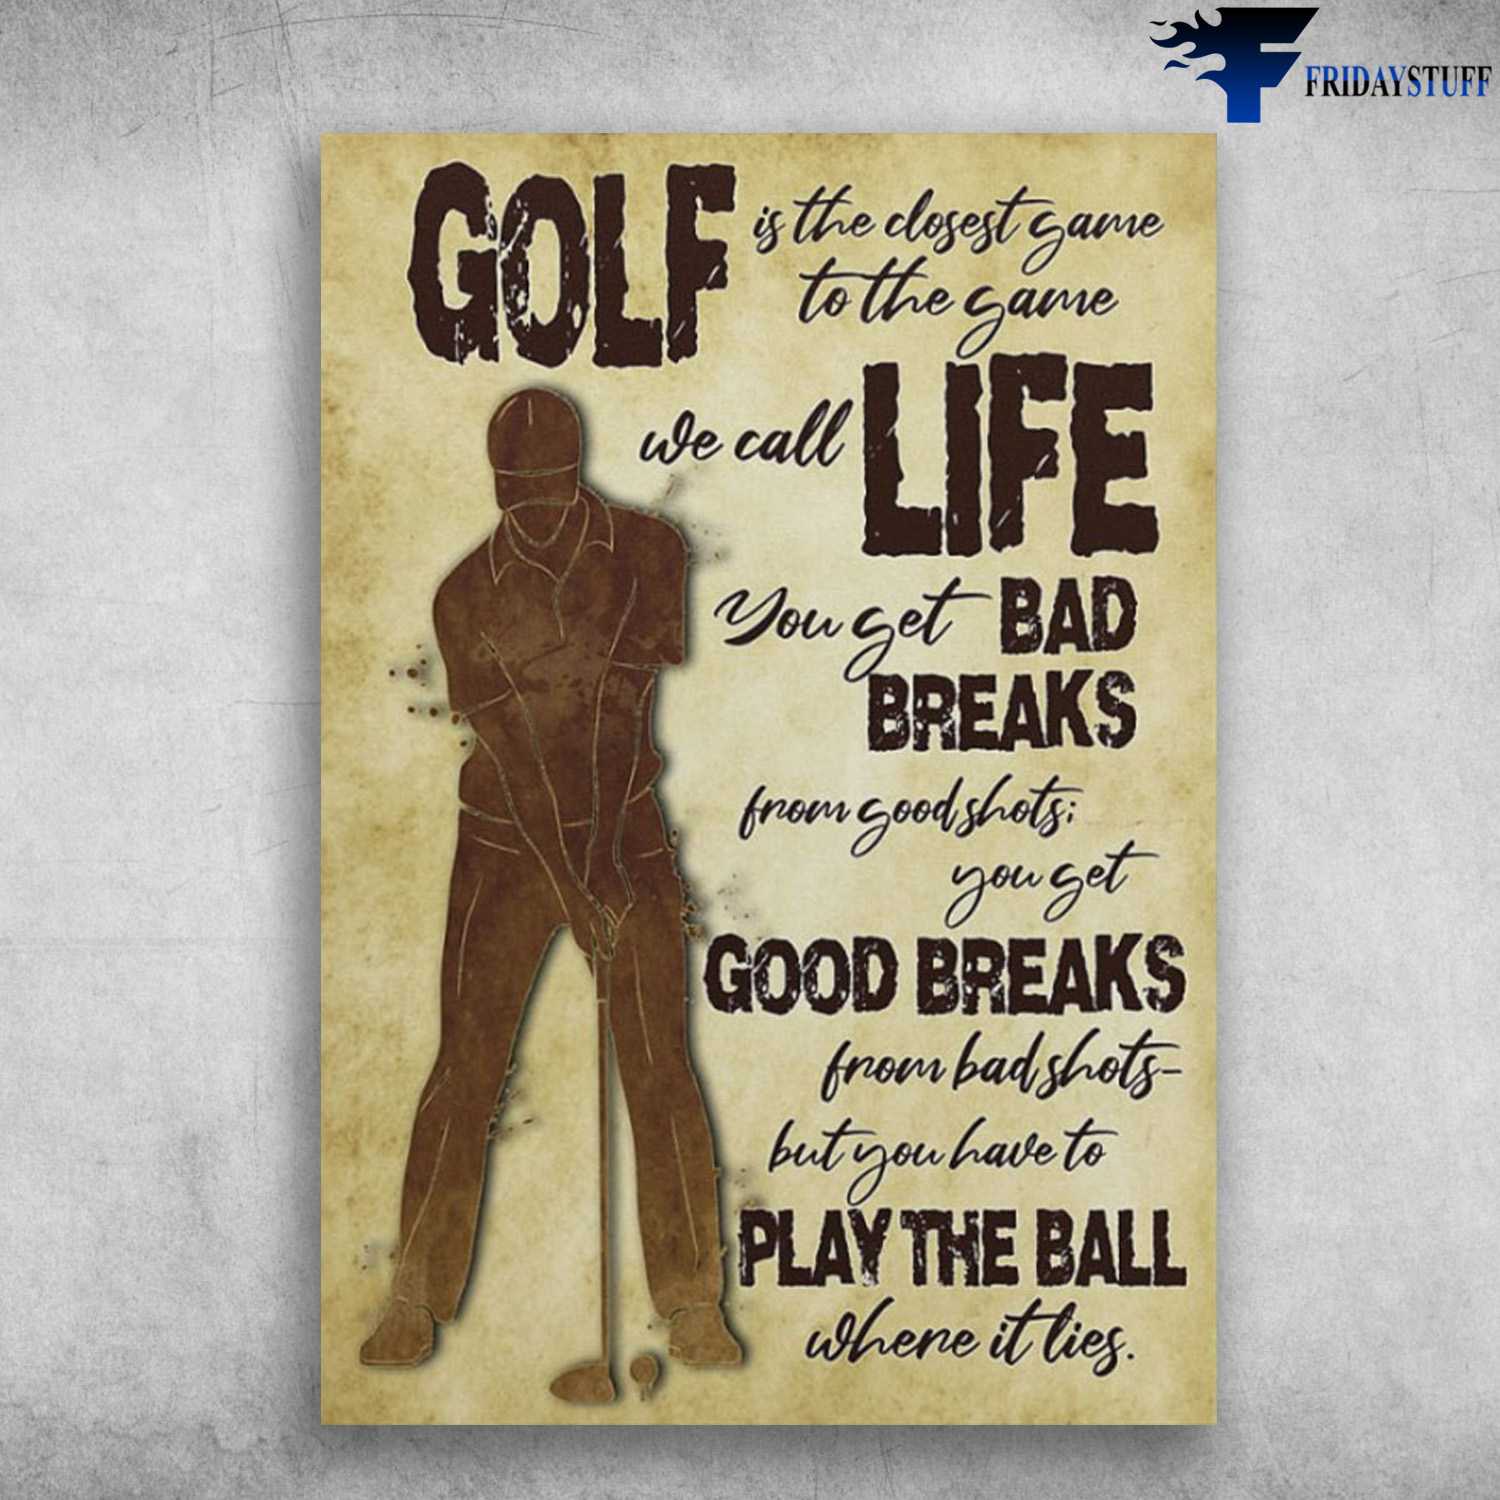 Golf Player, Golf Lover, Golf Is The Closest Game, To The Game We Call Life, You Get Bad Breaks, From Goodshots, You Get Good Breaks From Bad Shot